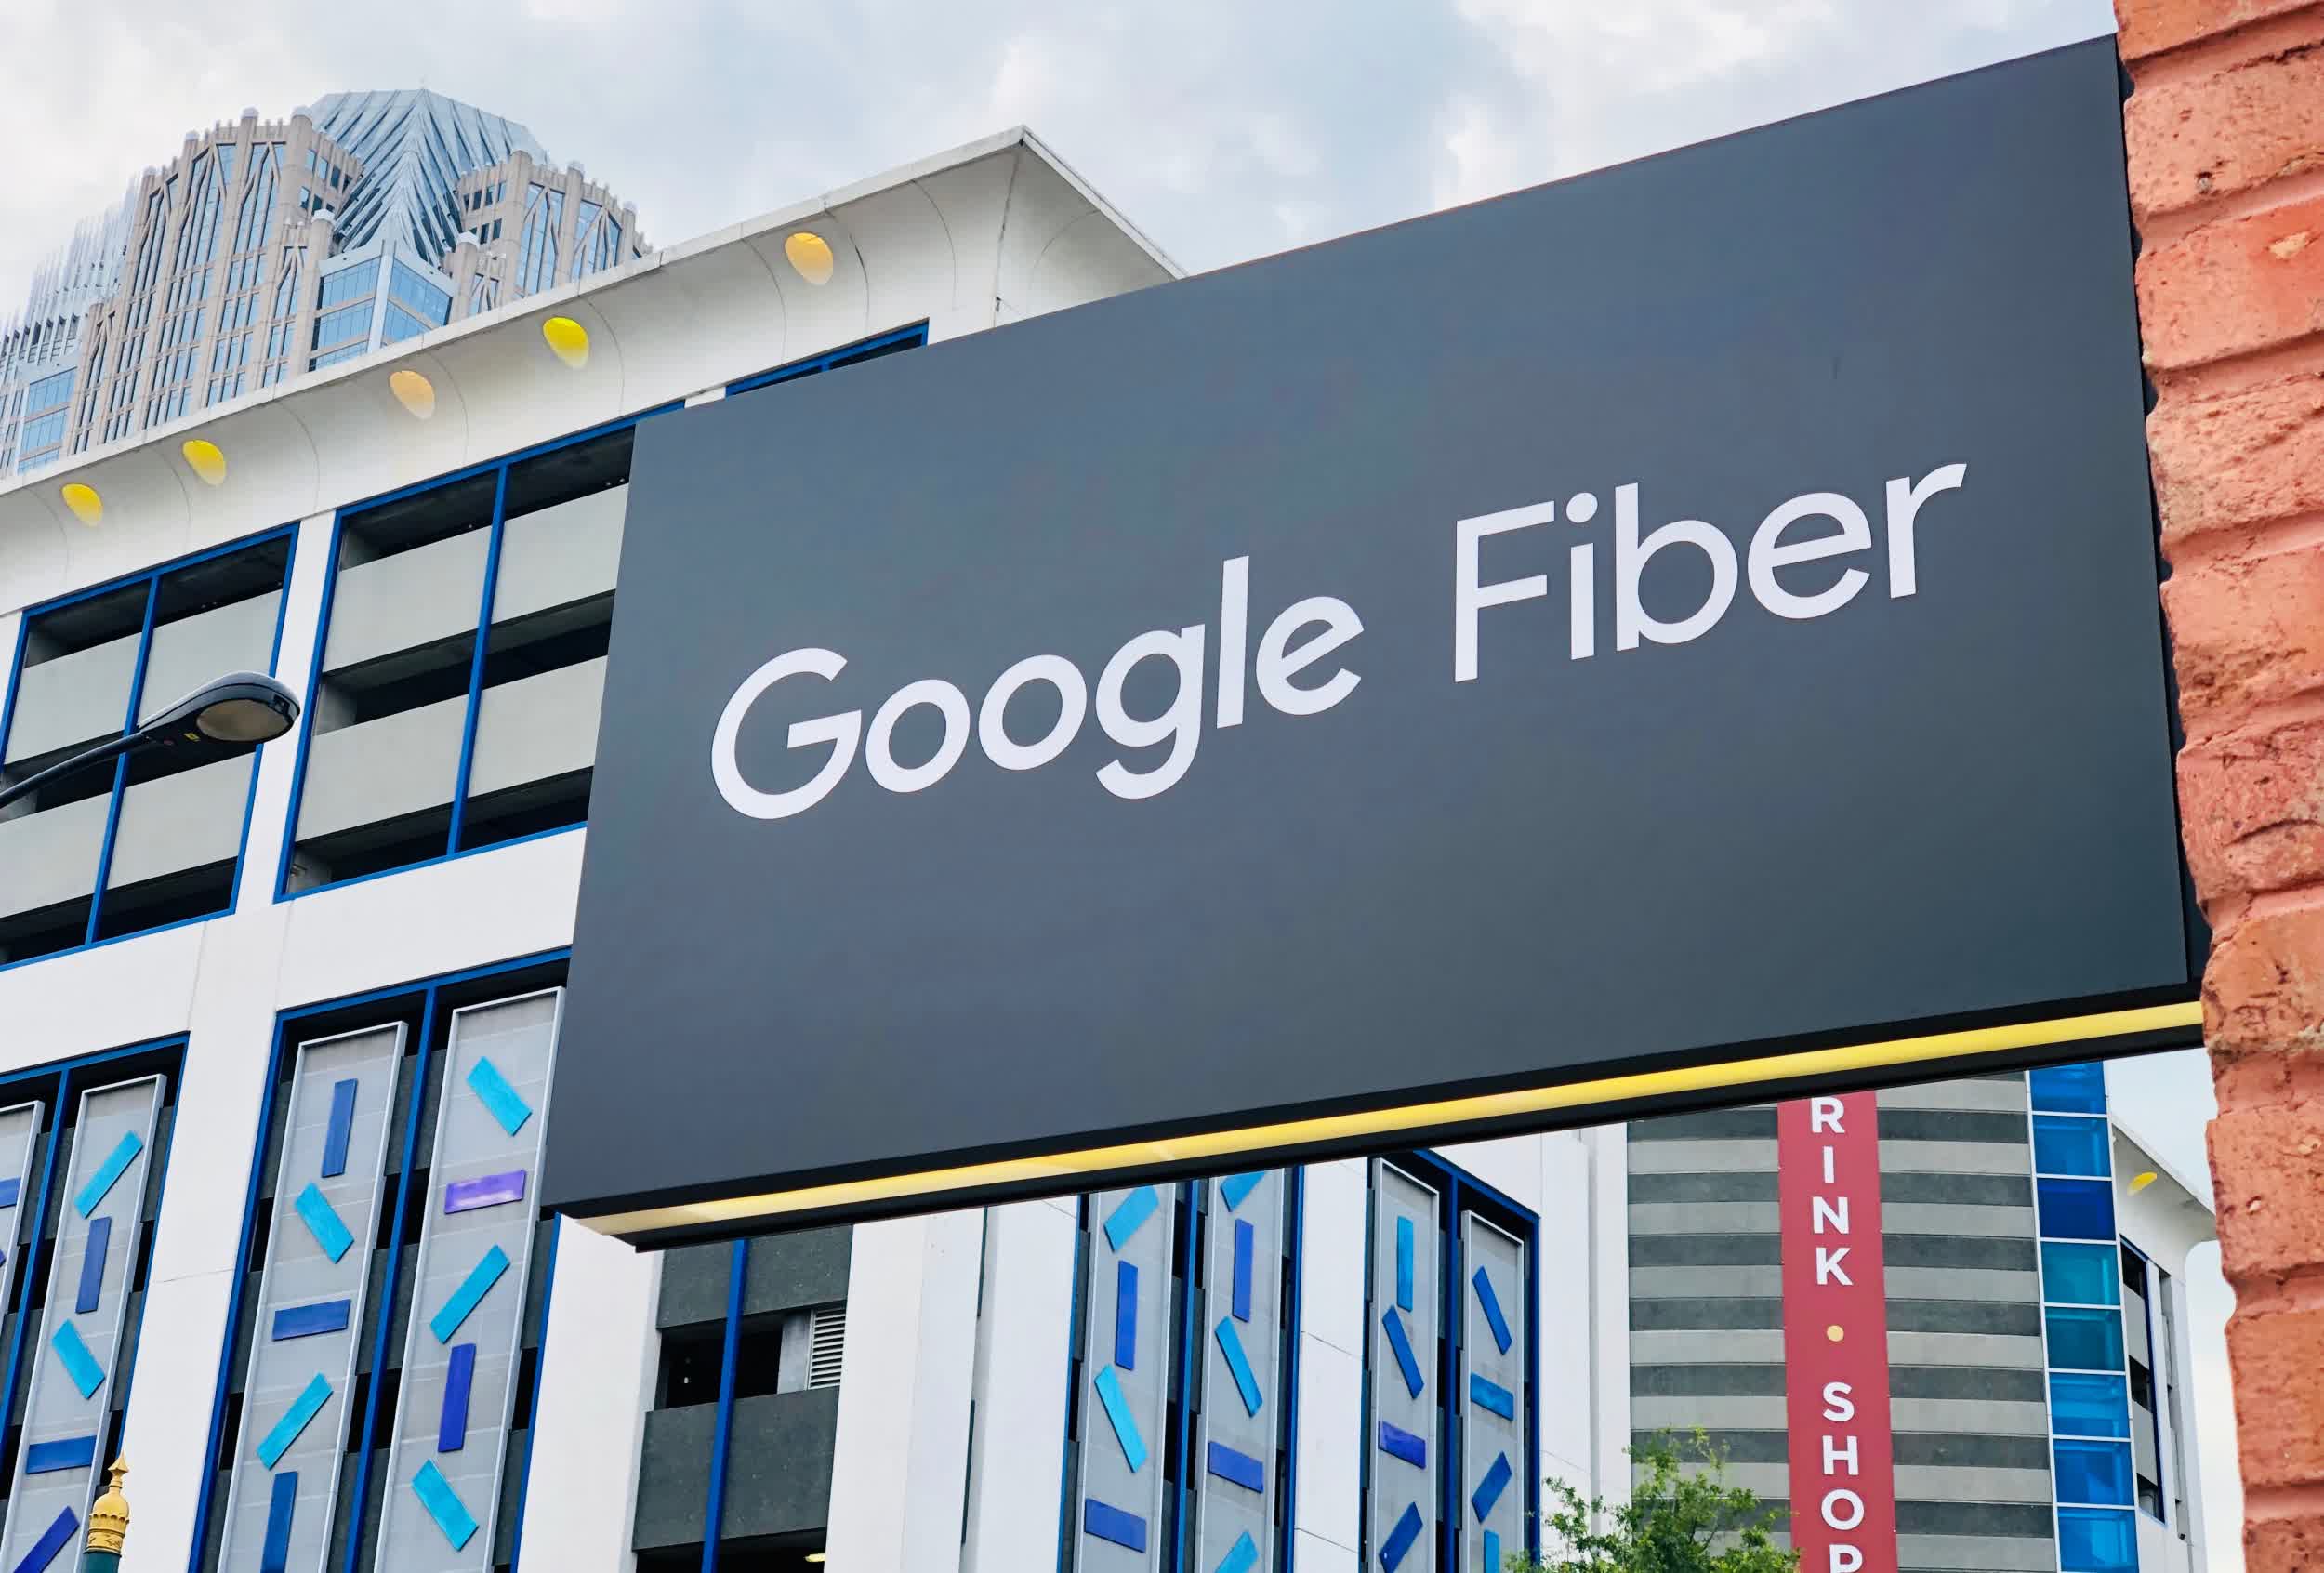 Google's 2 Gbps fiber Internet service is now widely available in Nashville and Huntsville